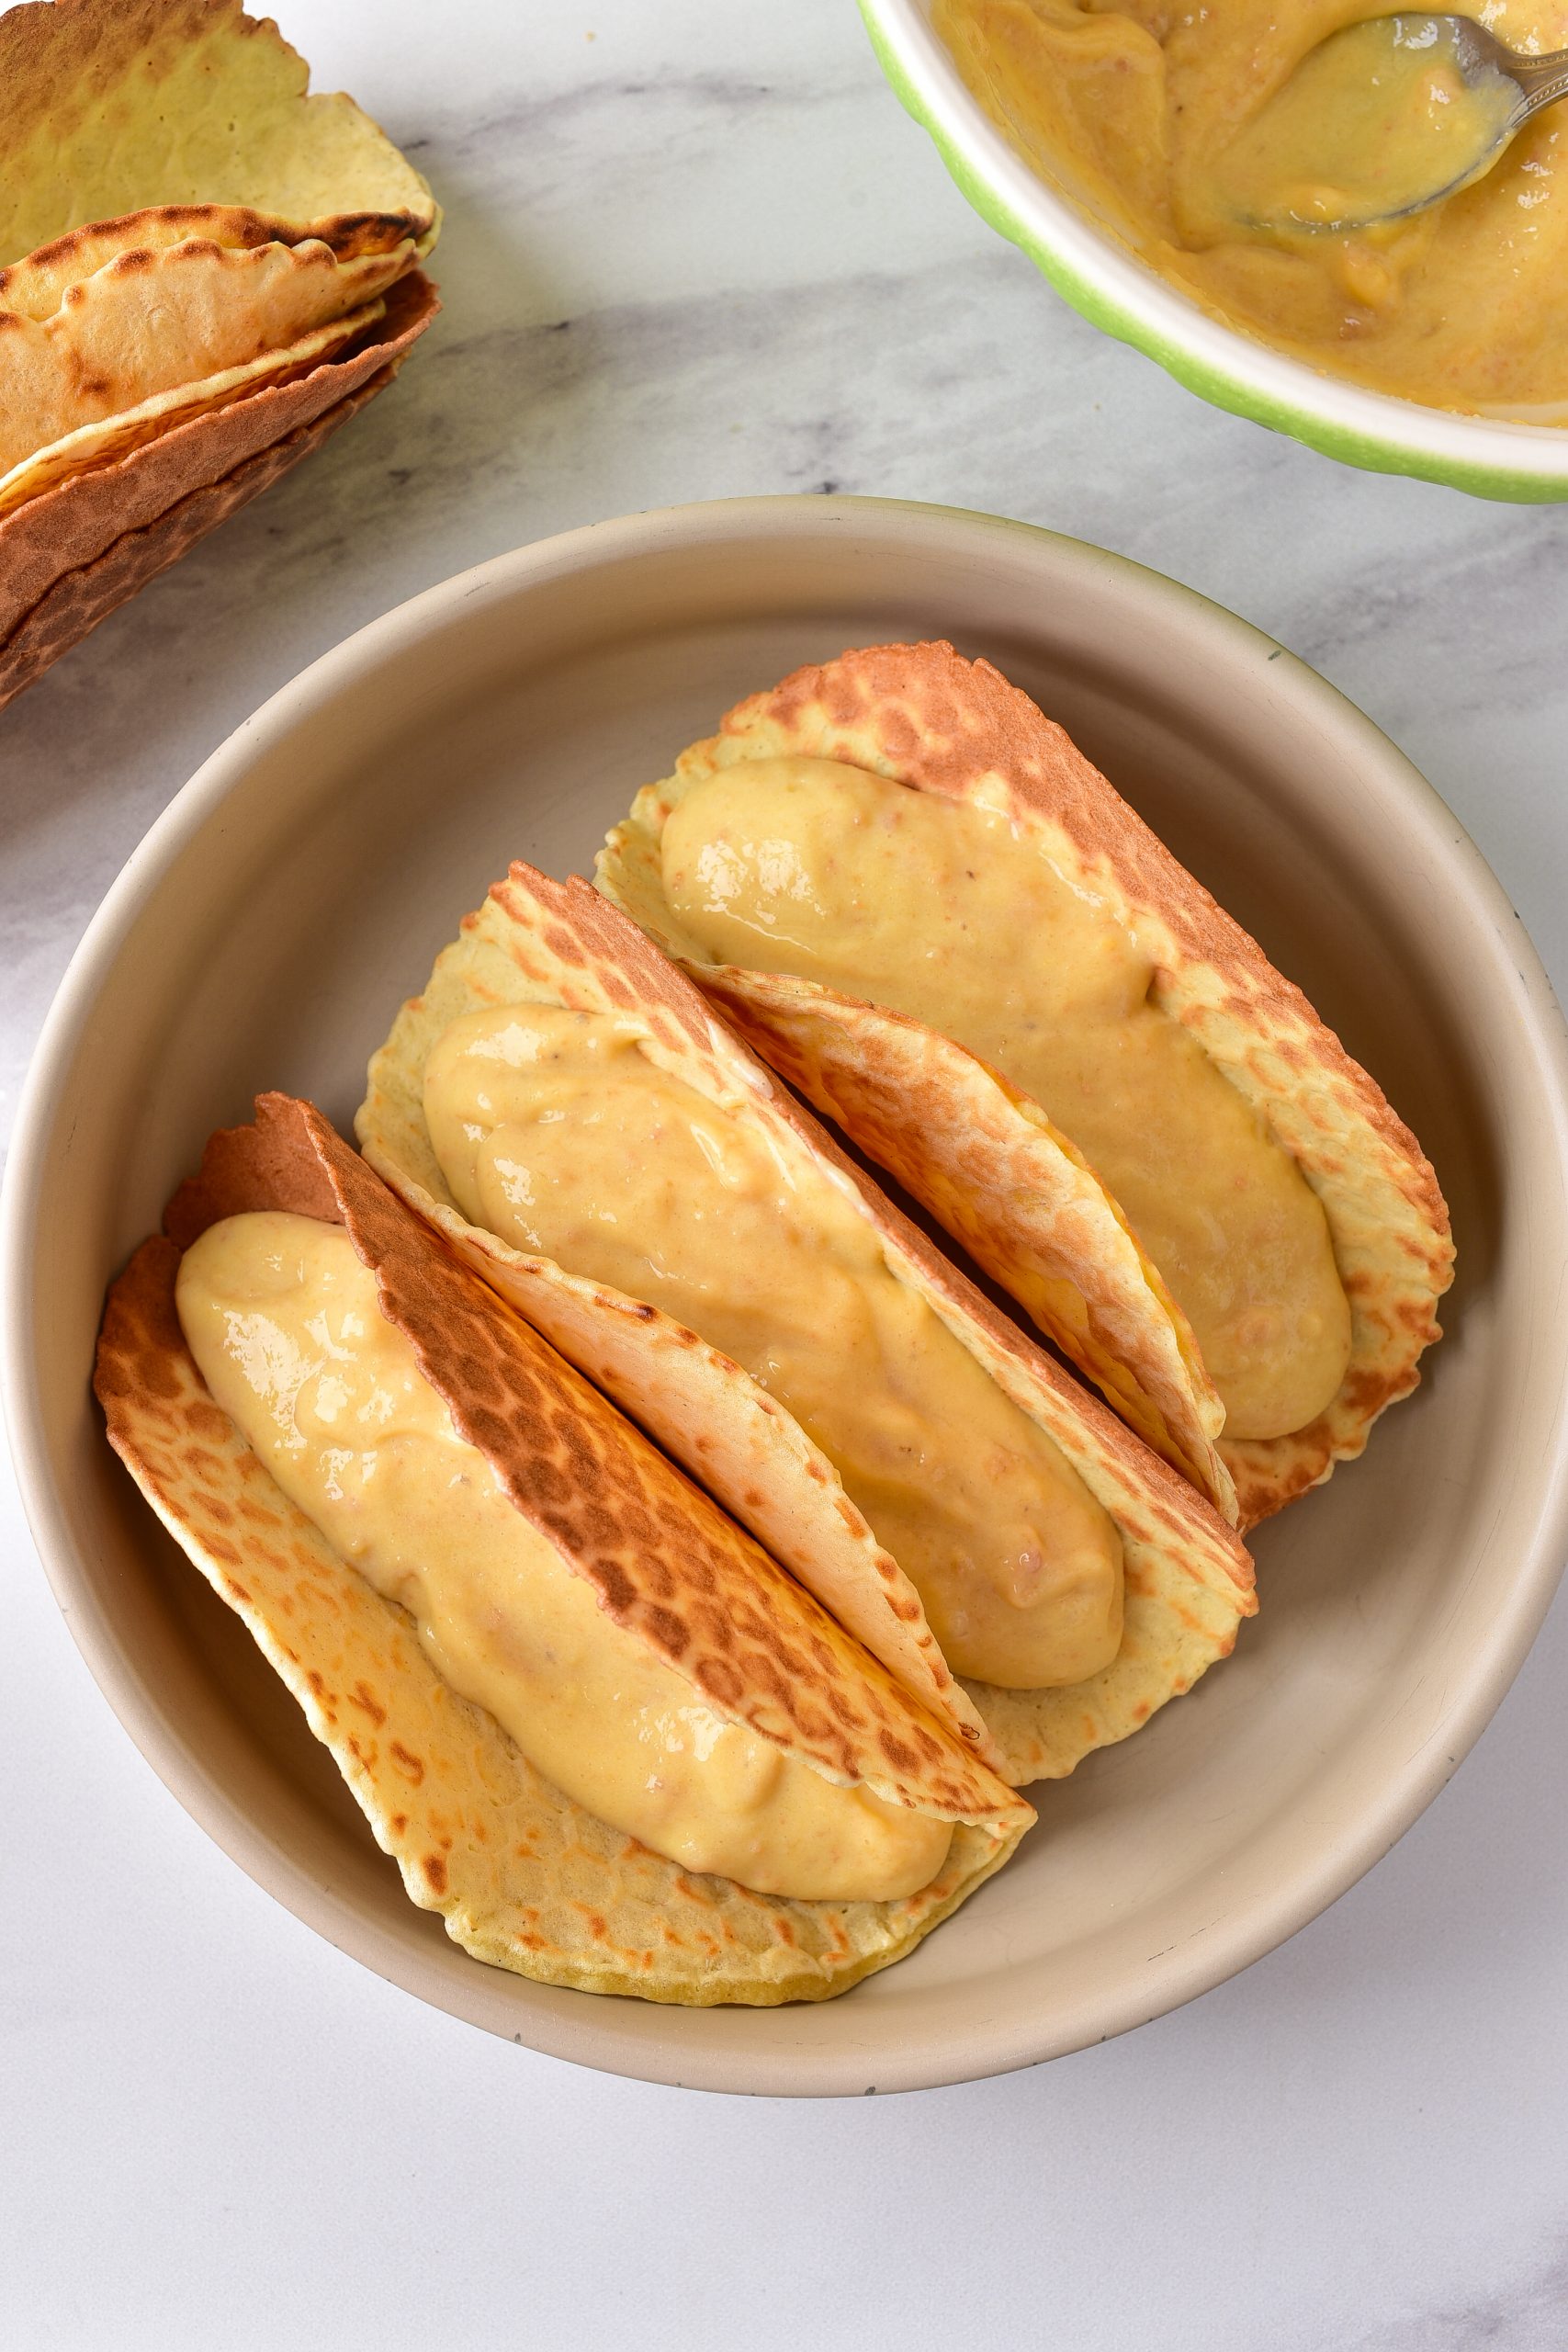 Place a layer of wafers into the bottom of each taco shell, and top with an equal amount of the pudding mixture.